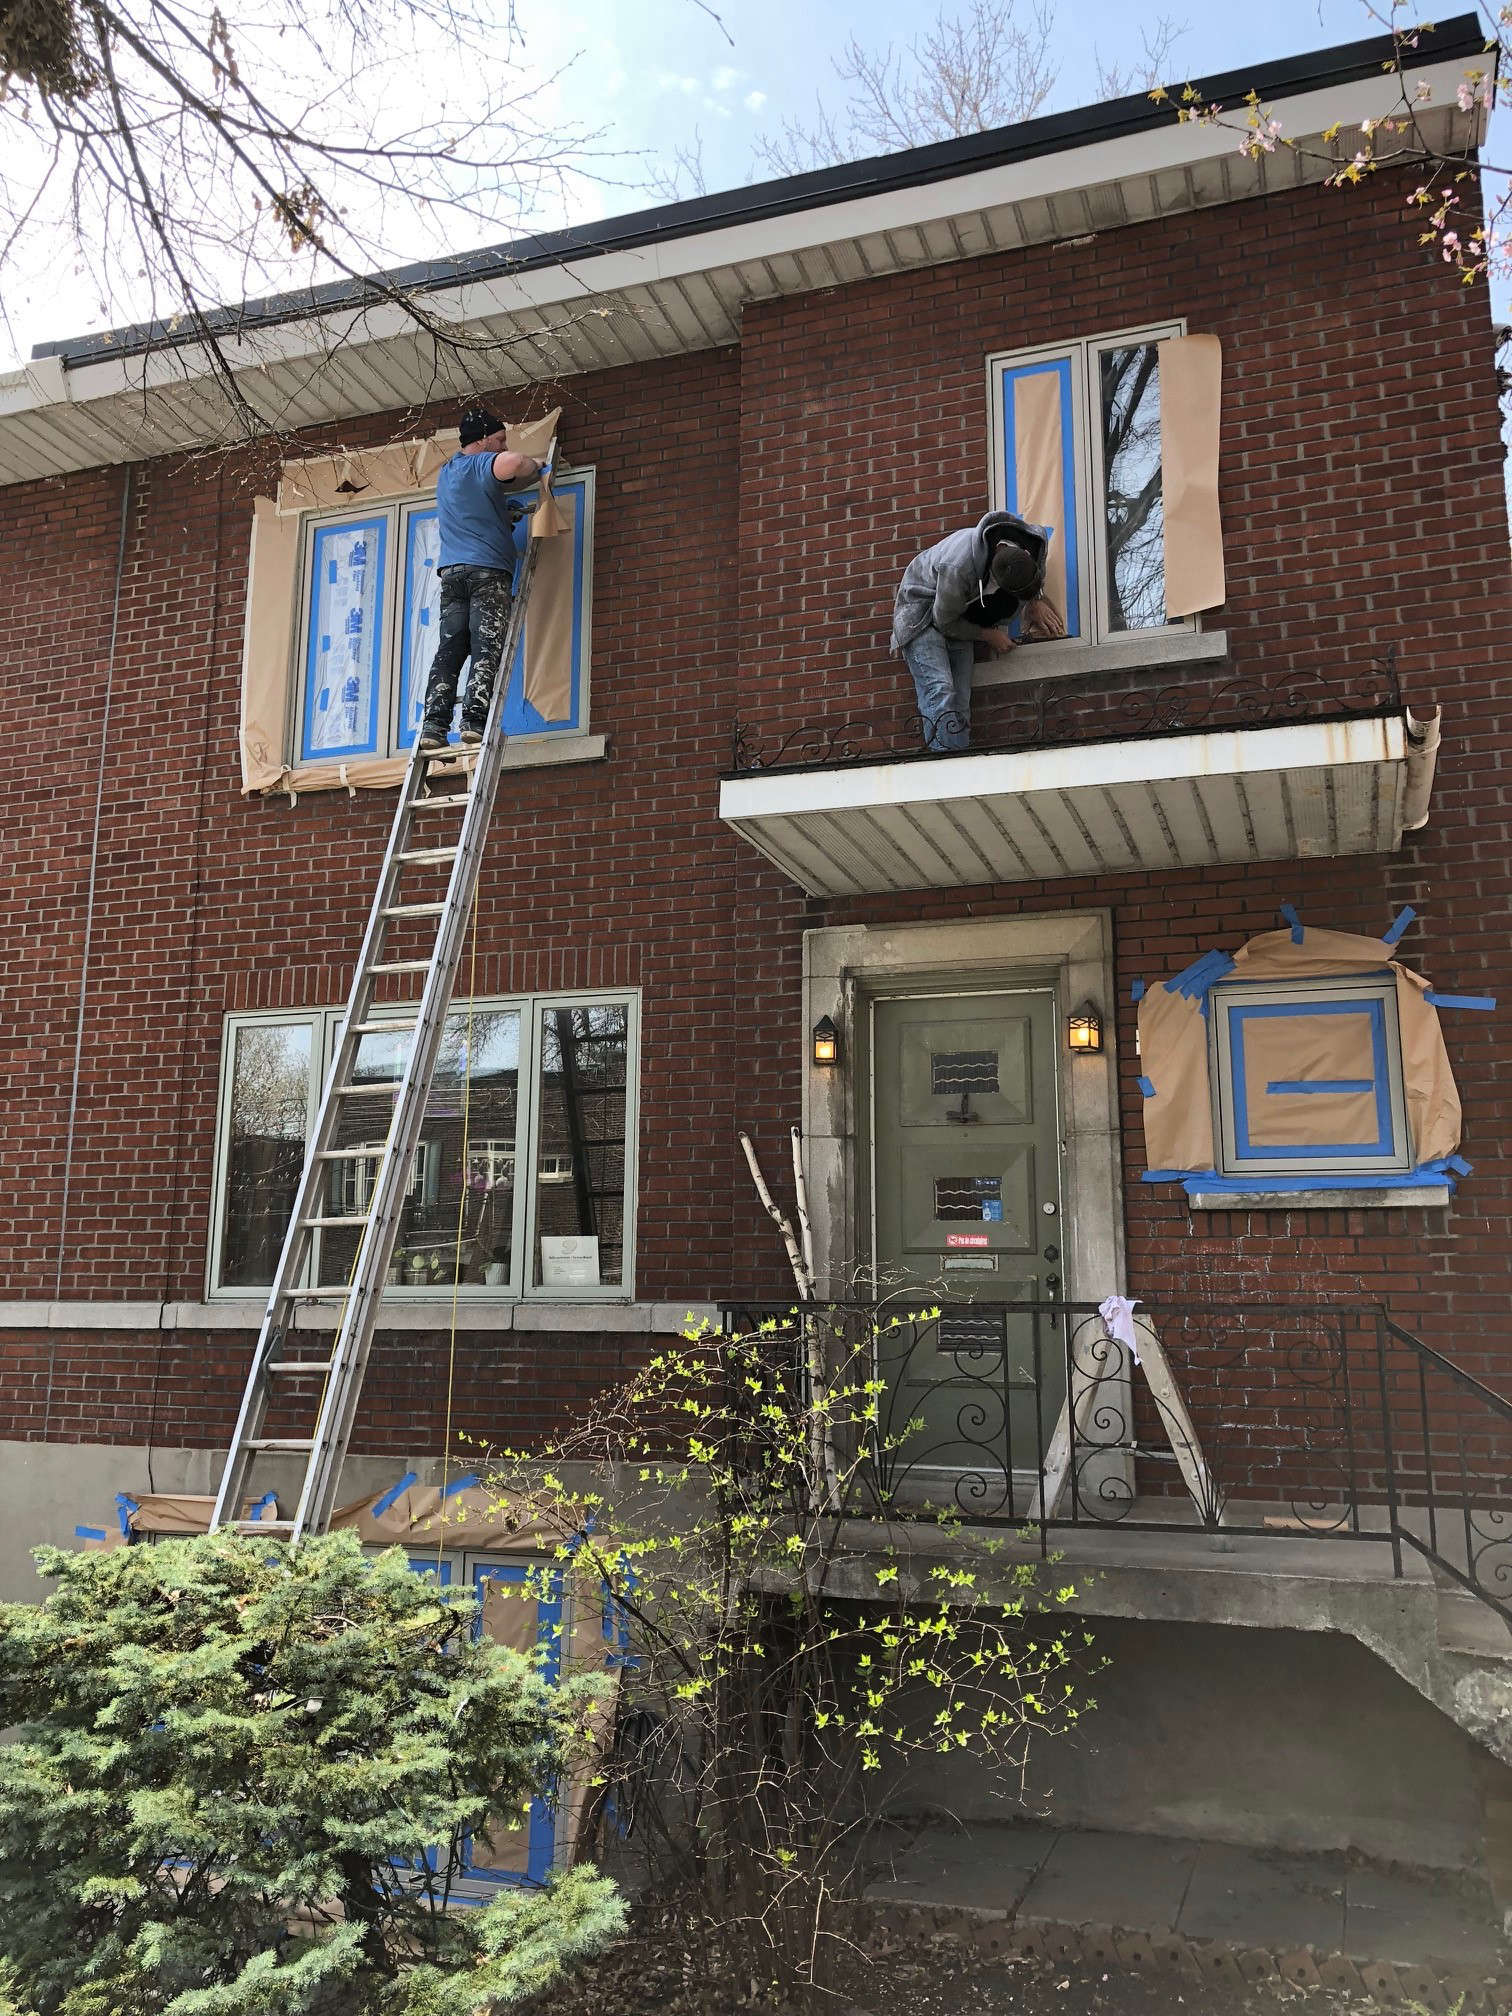 Two painters are preparing the windows of a brick building for painting